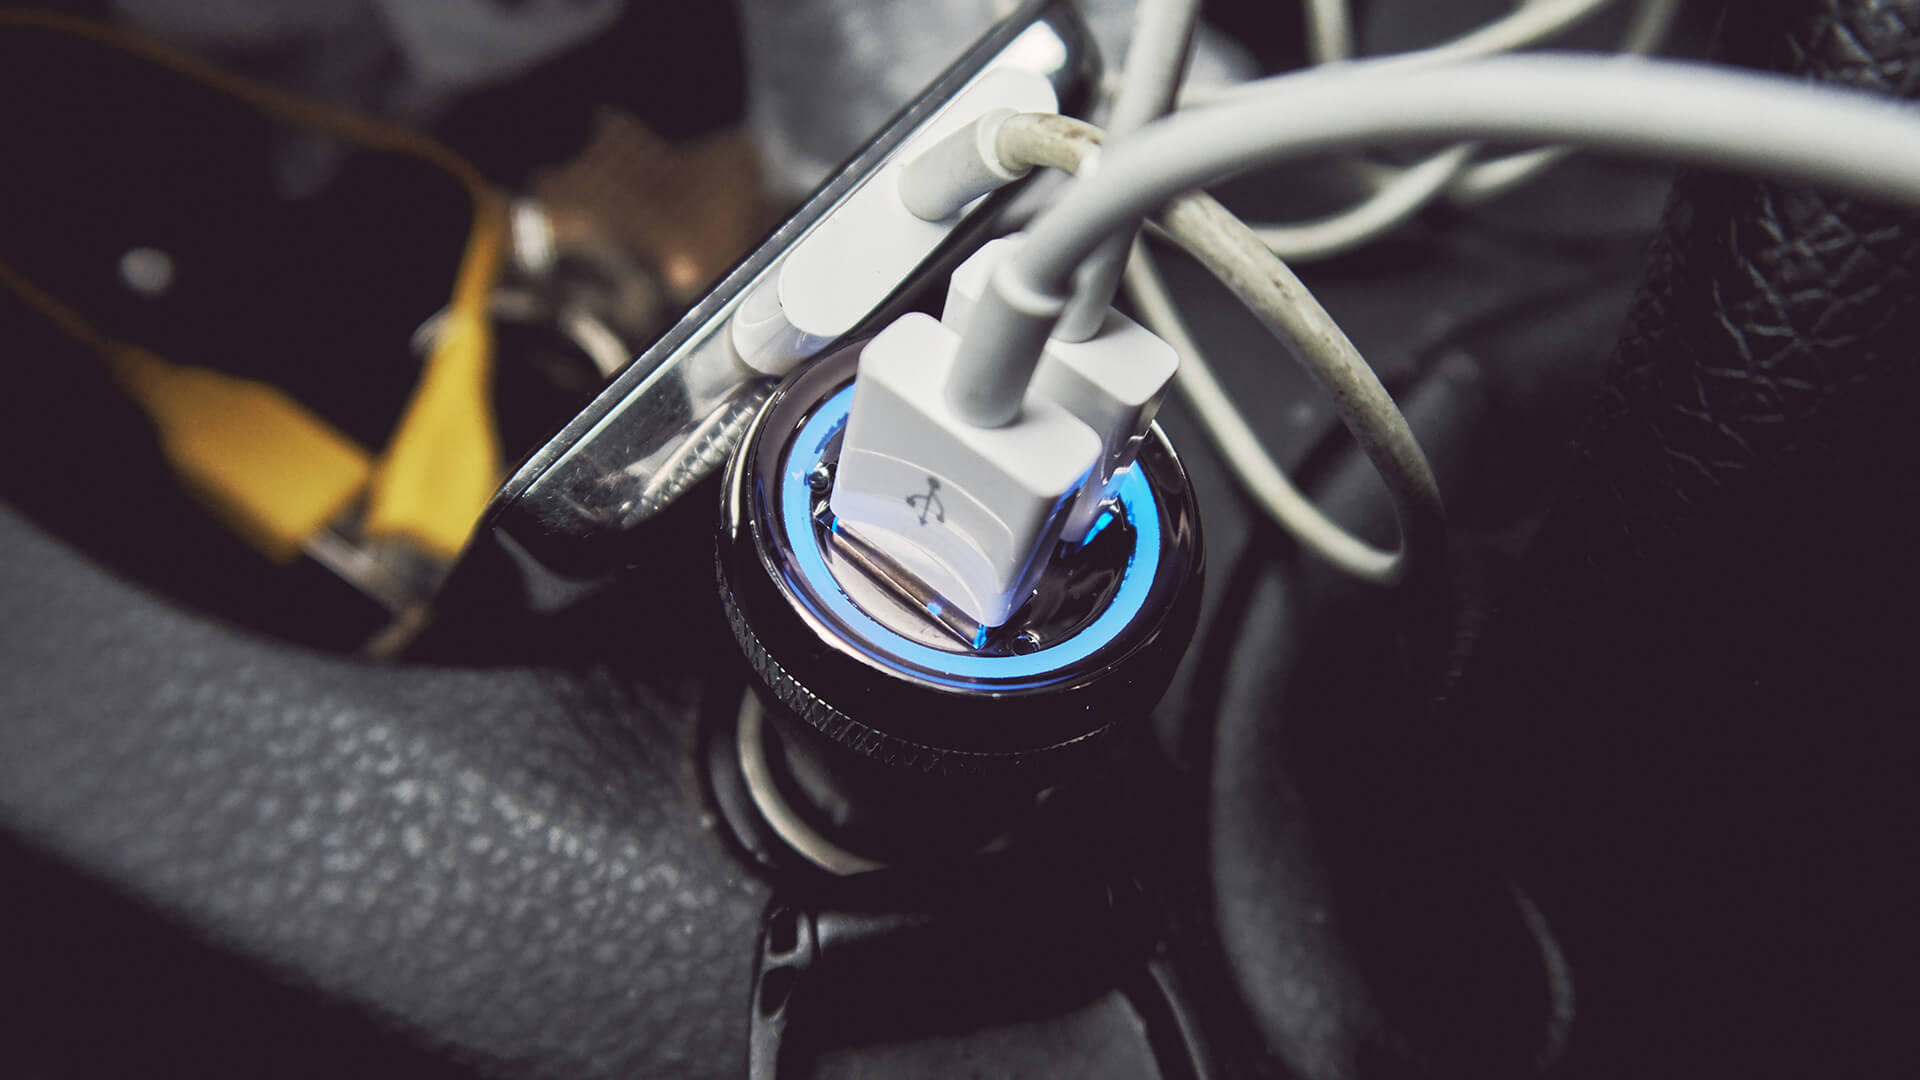 PNY Summer Essential: Family Car Charger